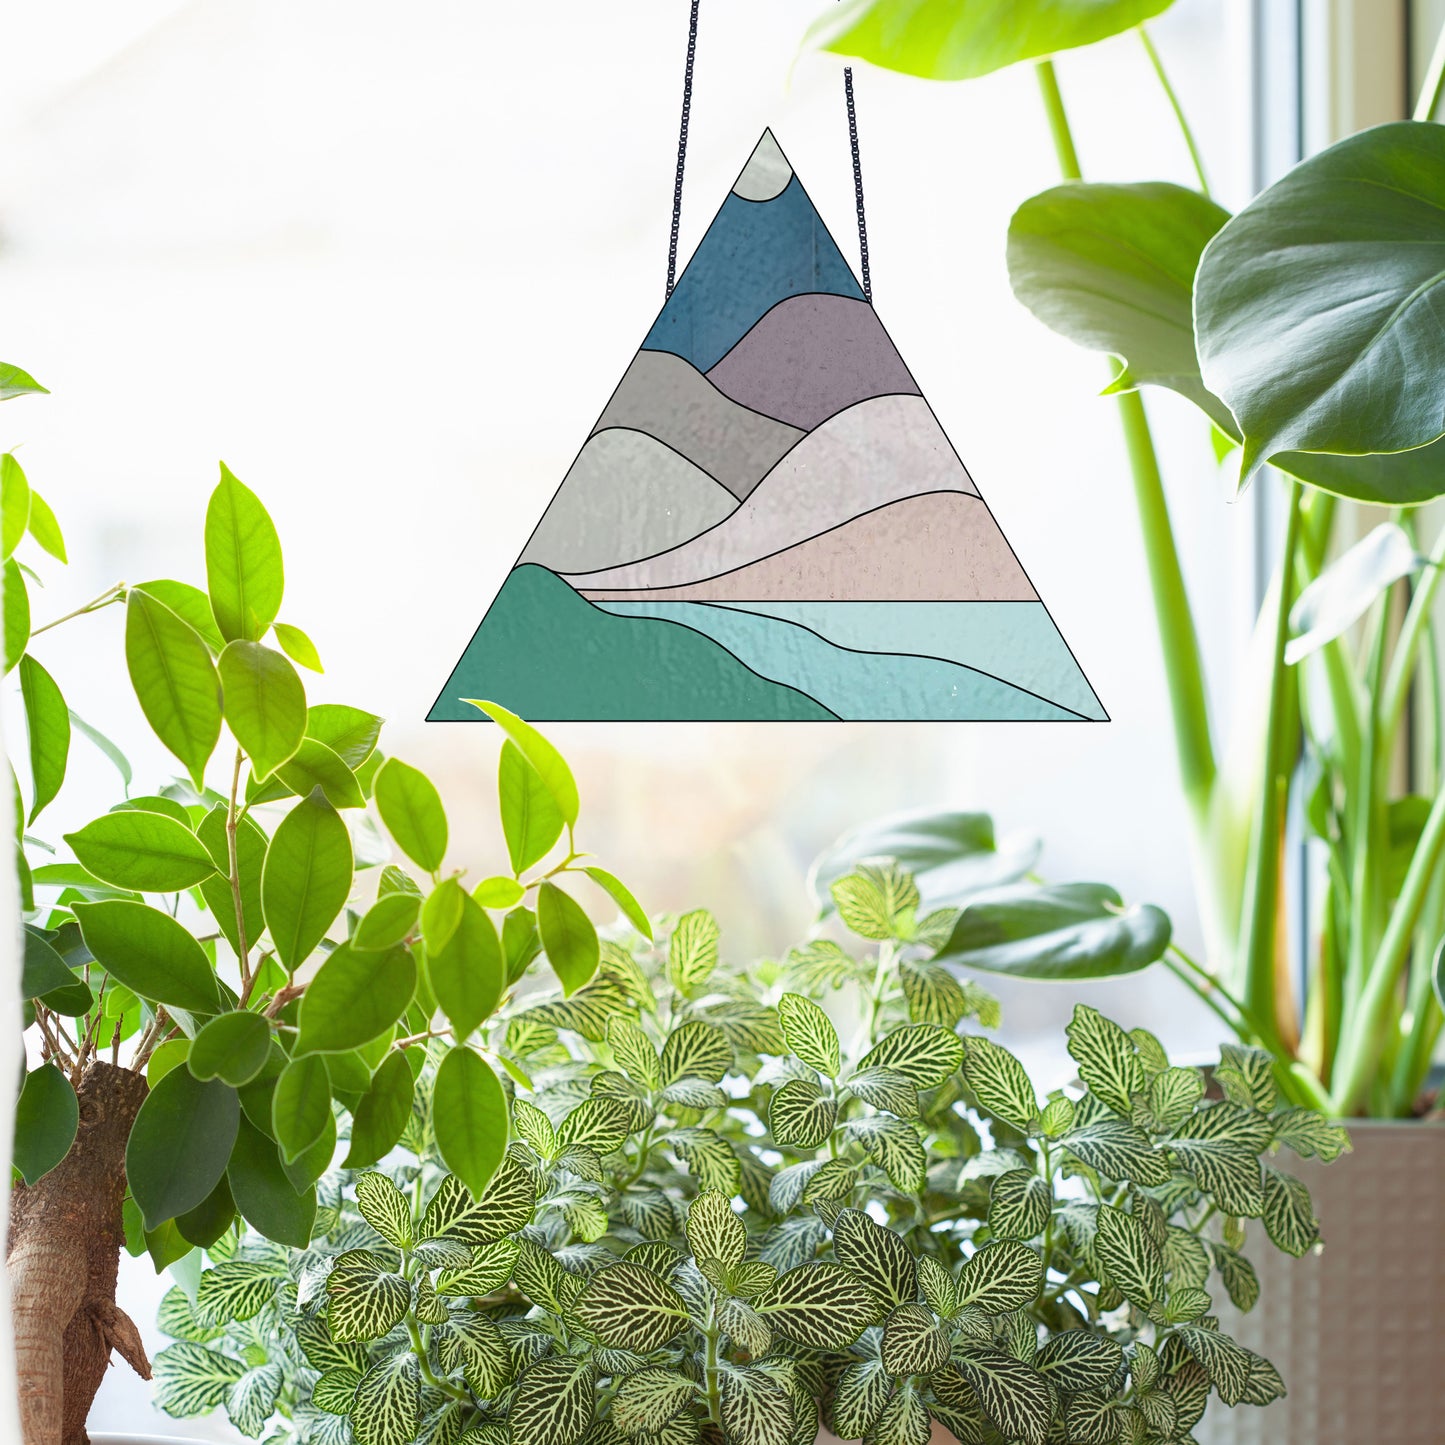 Triangle stained glass pattern for a boho landscape, instant PDF download, shown in a window with plants